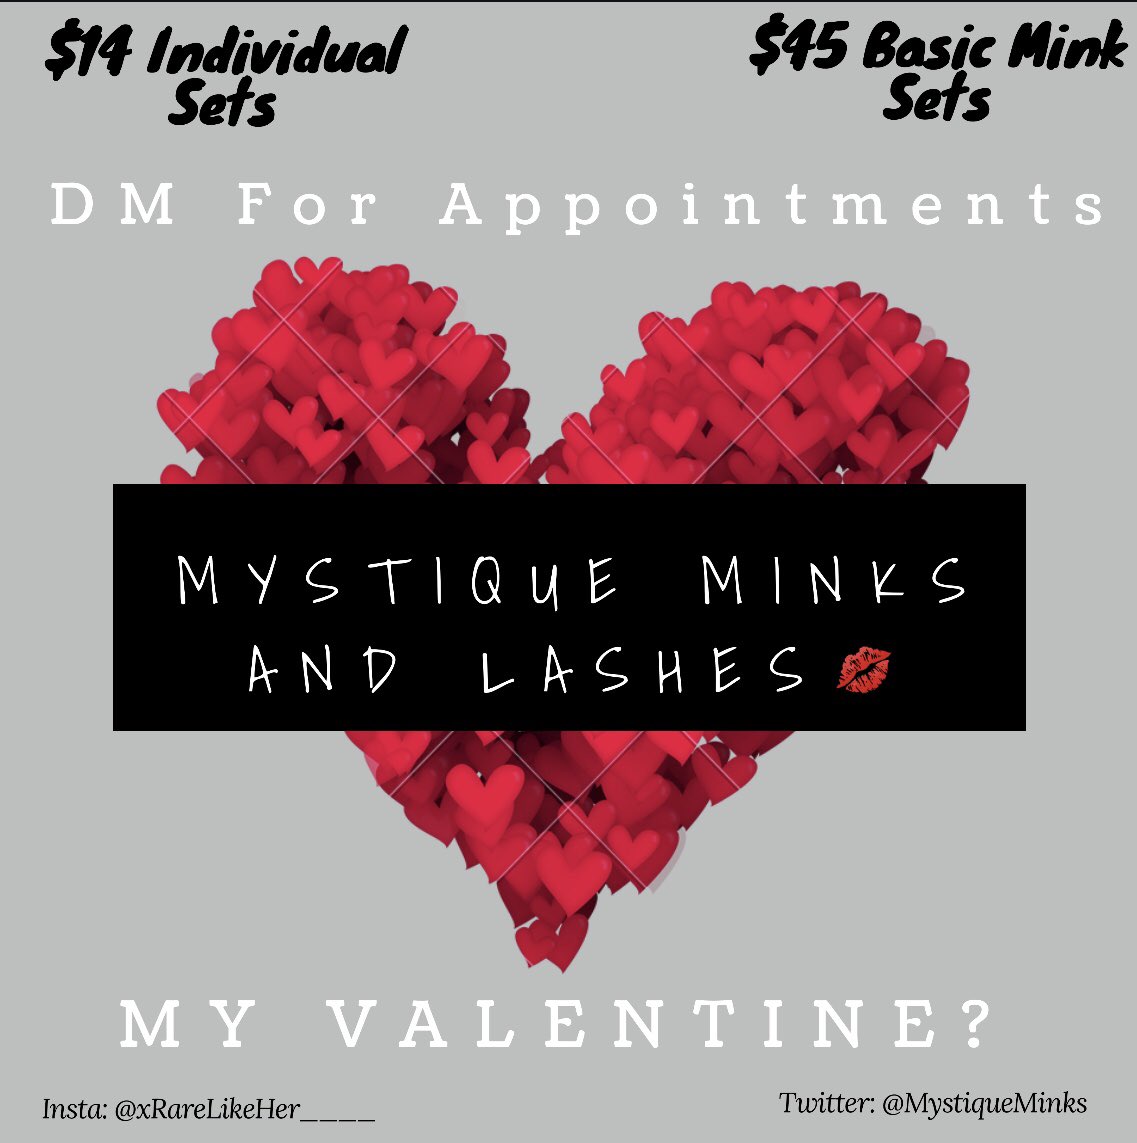 Clink the Link in my Bio for booking!!😘 #siue21 #siue #siue19 #siue18 #siue20 #stl #stllashes #stlstylist #stlminklashes #stlminkextensions #stlminks #stllashtech #stllashes #stllashextensions #stllashartist #stllash #stllashdeals #edwardsvillelashes #edwardsvillestylist